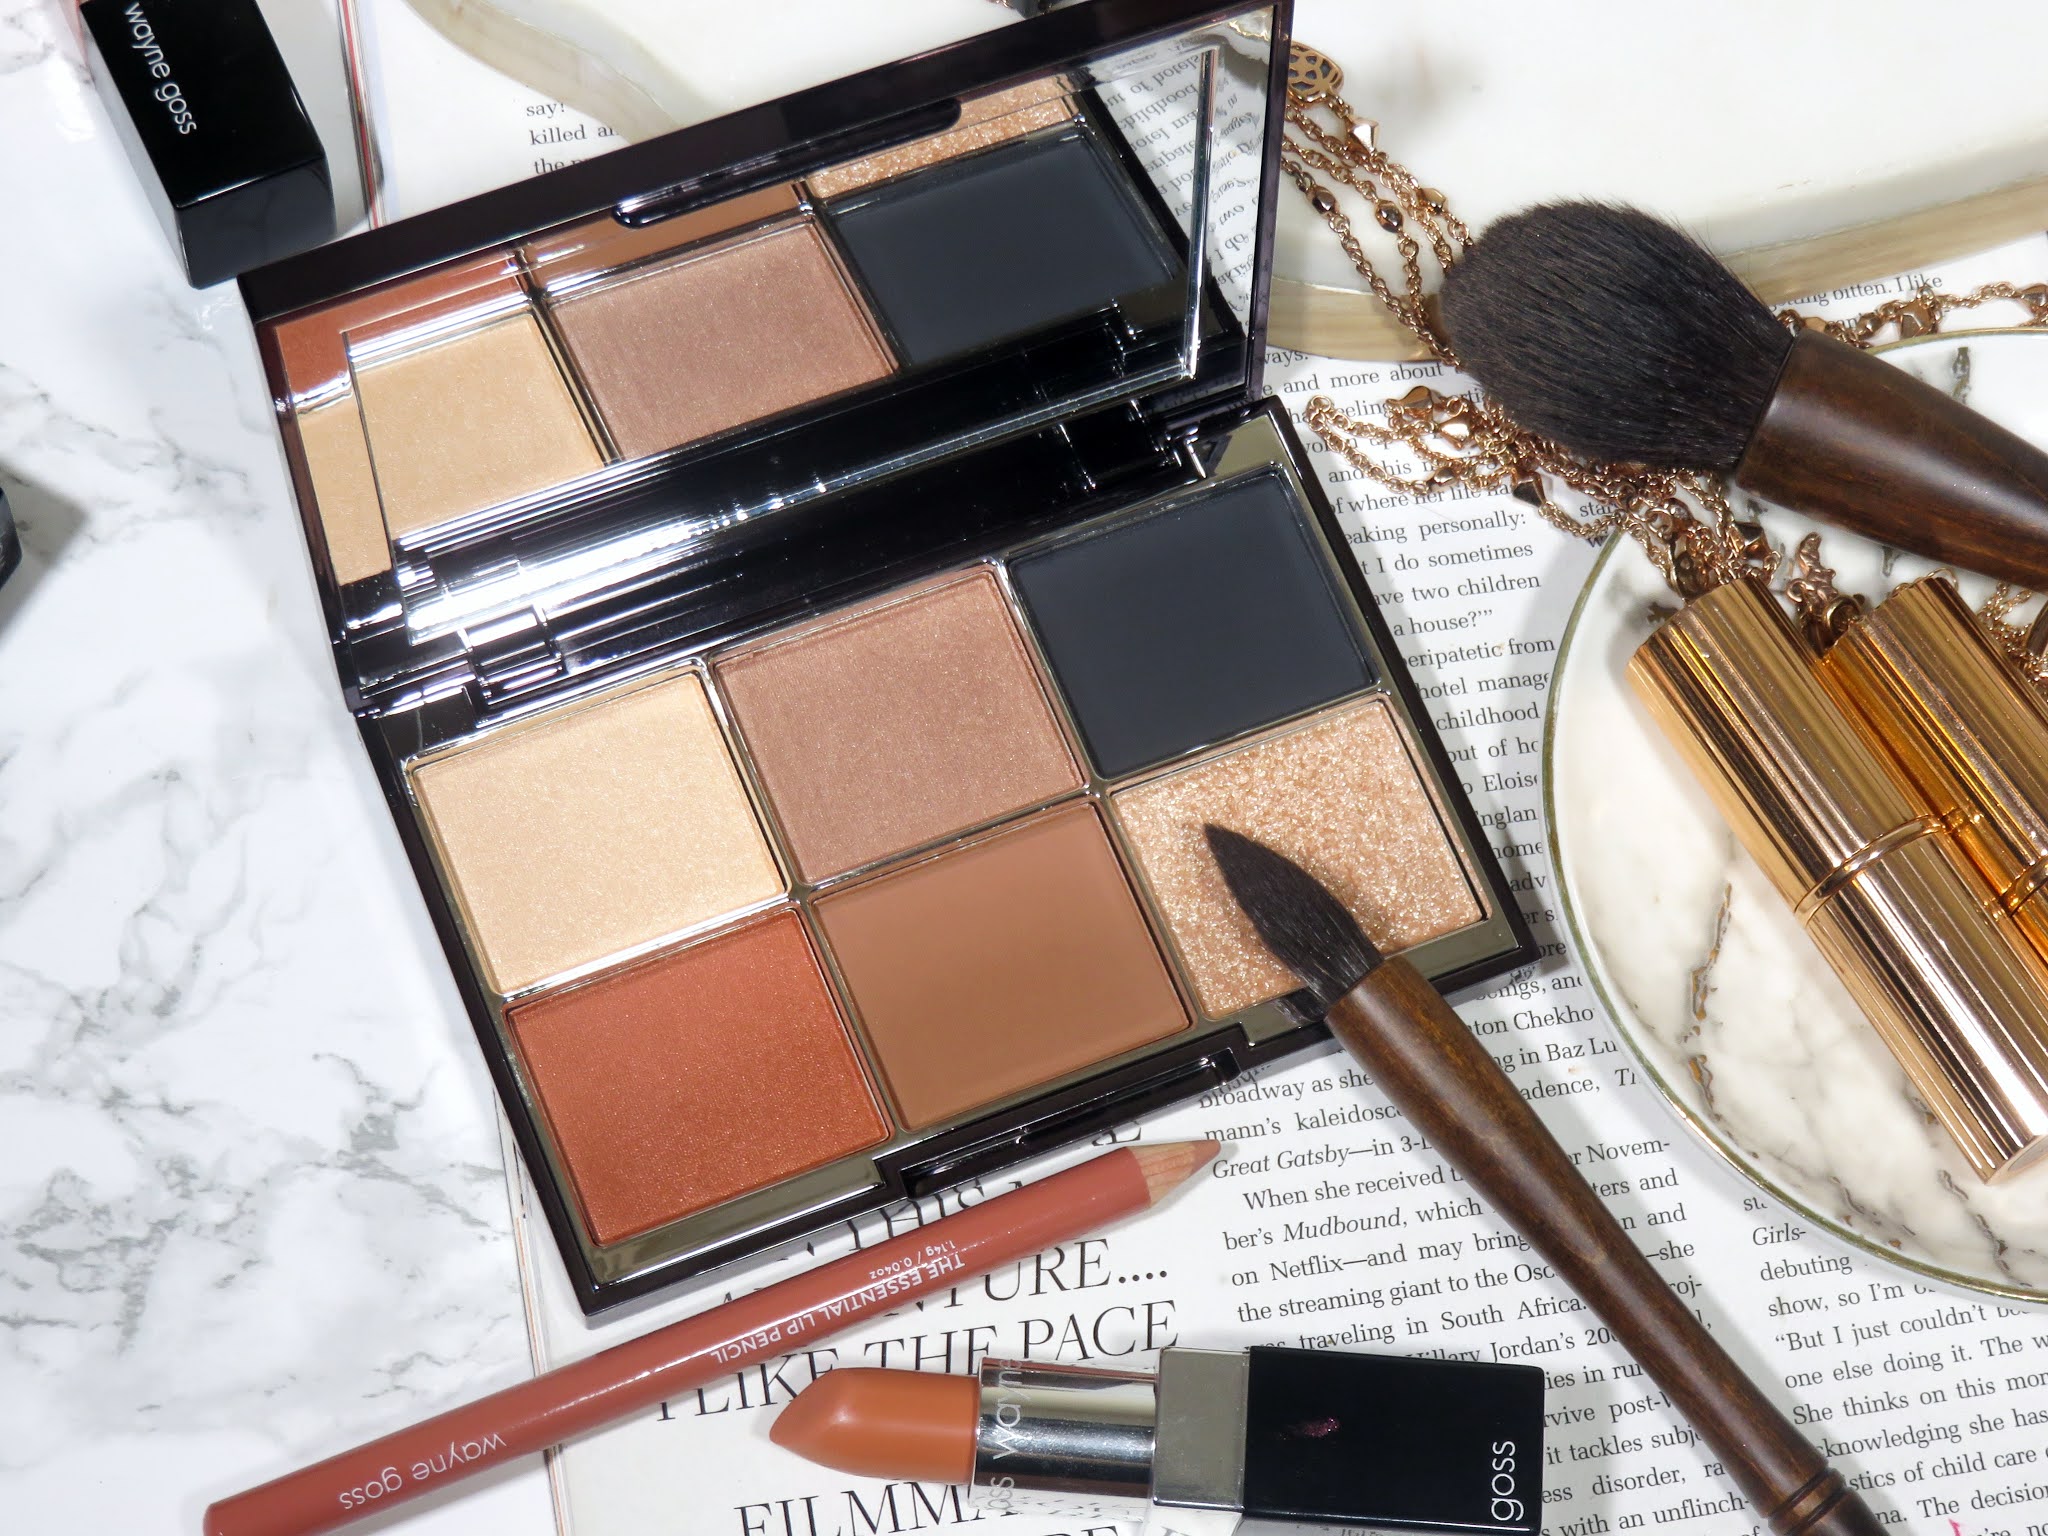 Wayne Goss The Luxury Eye Palette in Imperial Topaz Review and Swatches